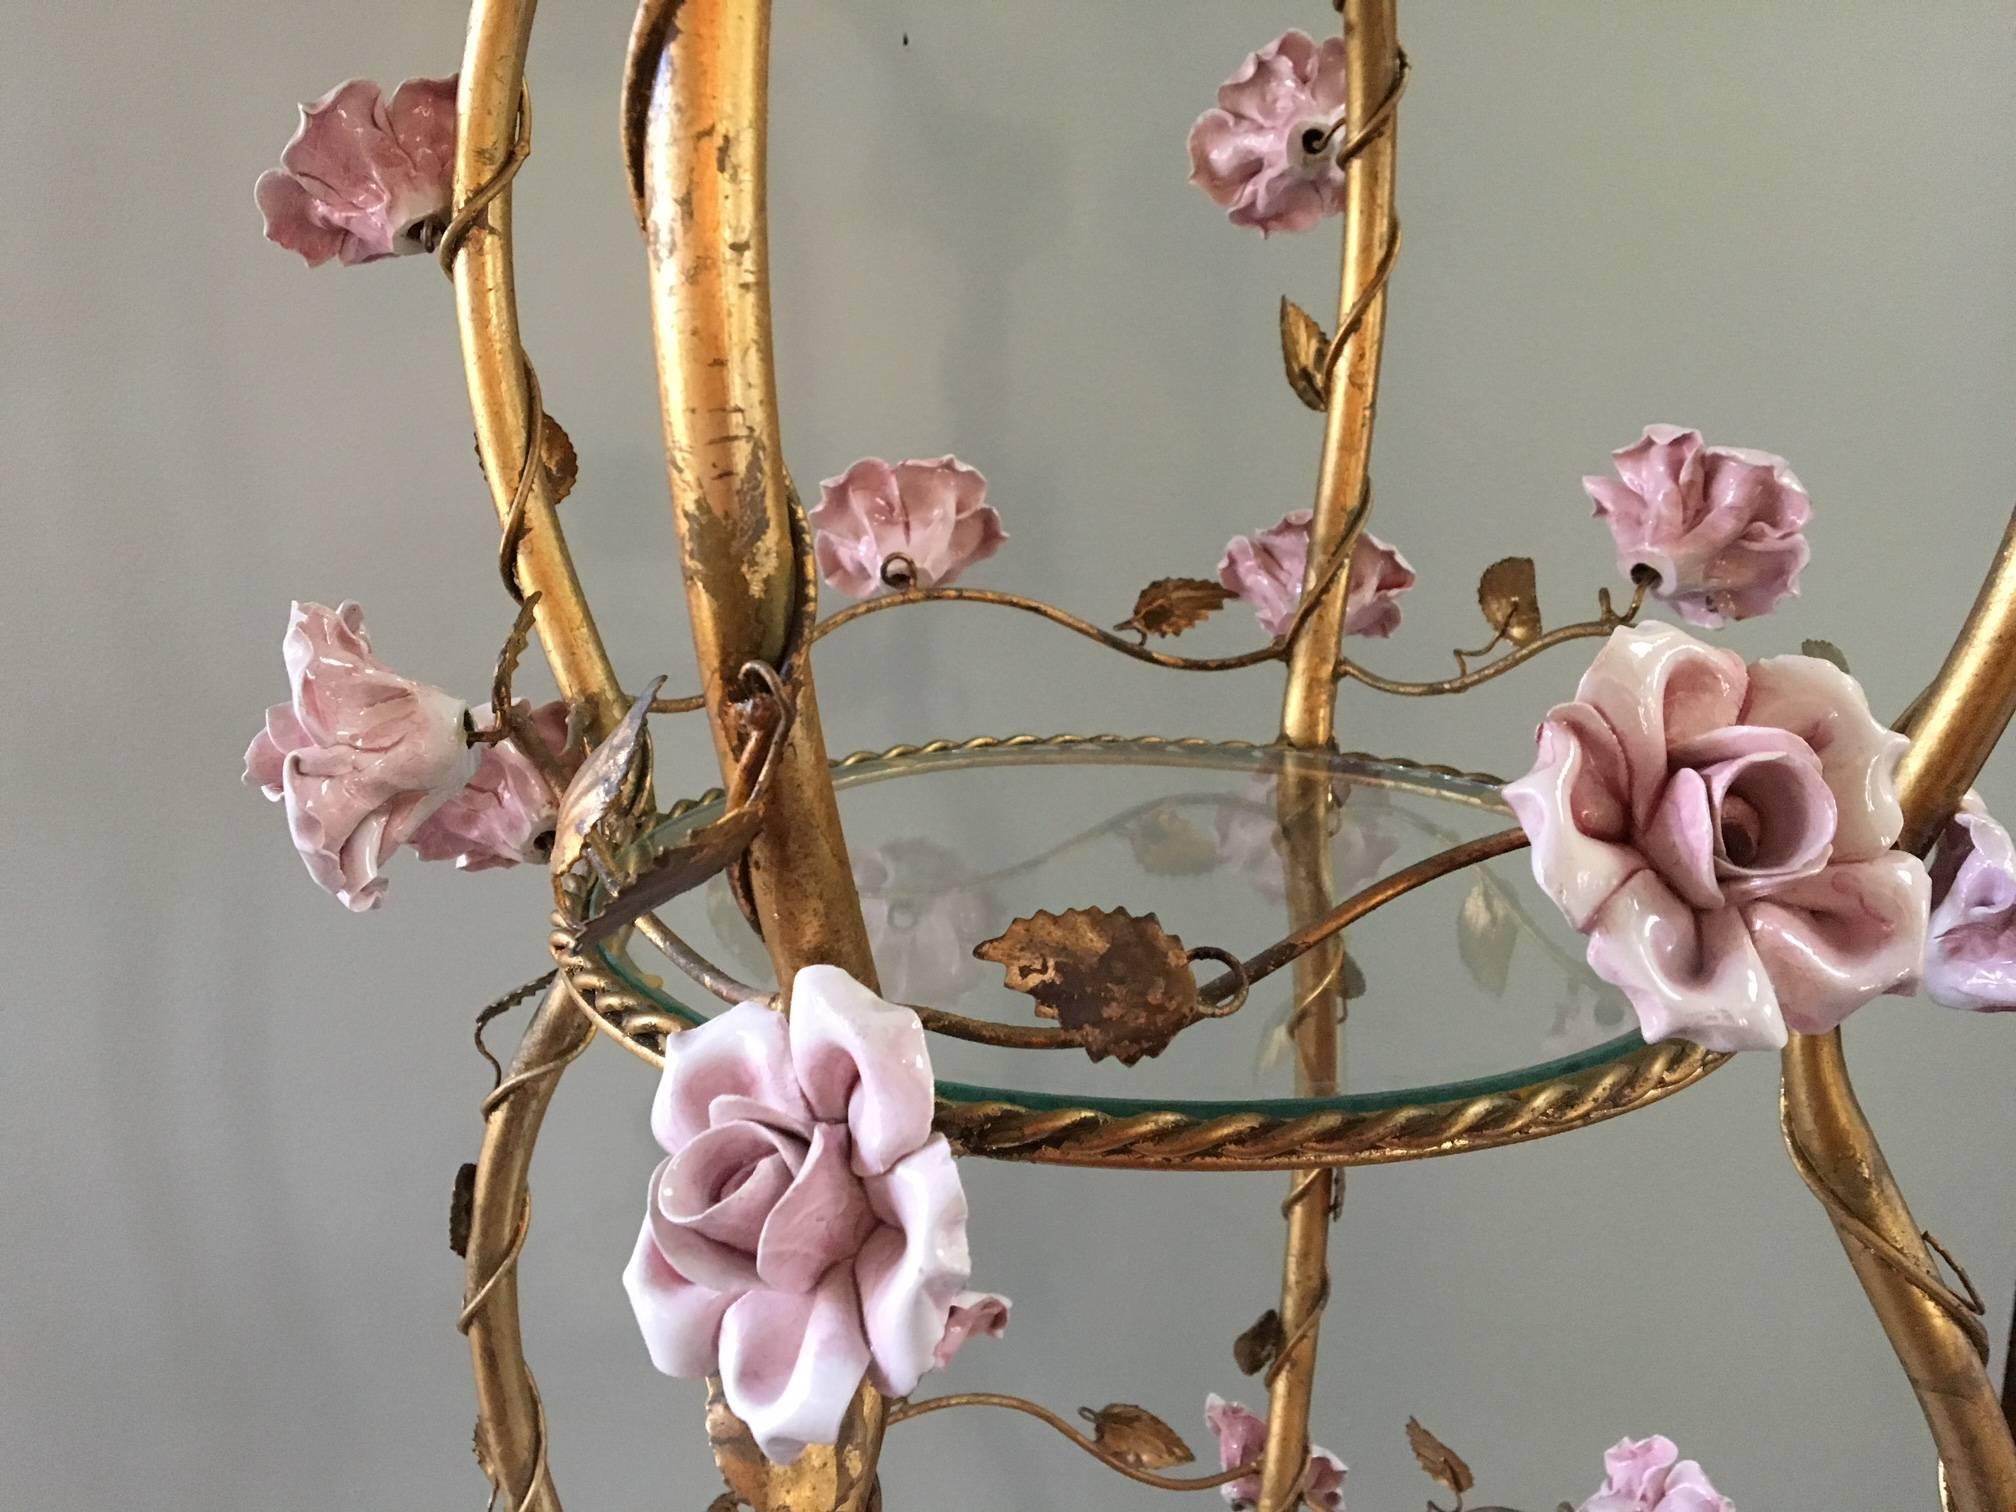 Large Italian tole étagère features gold gilt finish and 37 handcrafted ceramic roses. Single light shines down through glass shelves. Original 